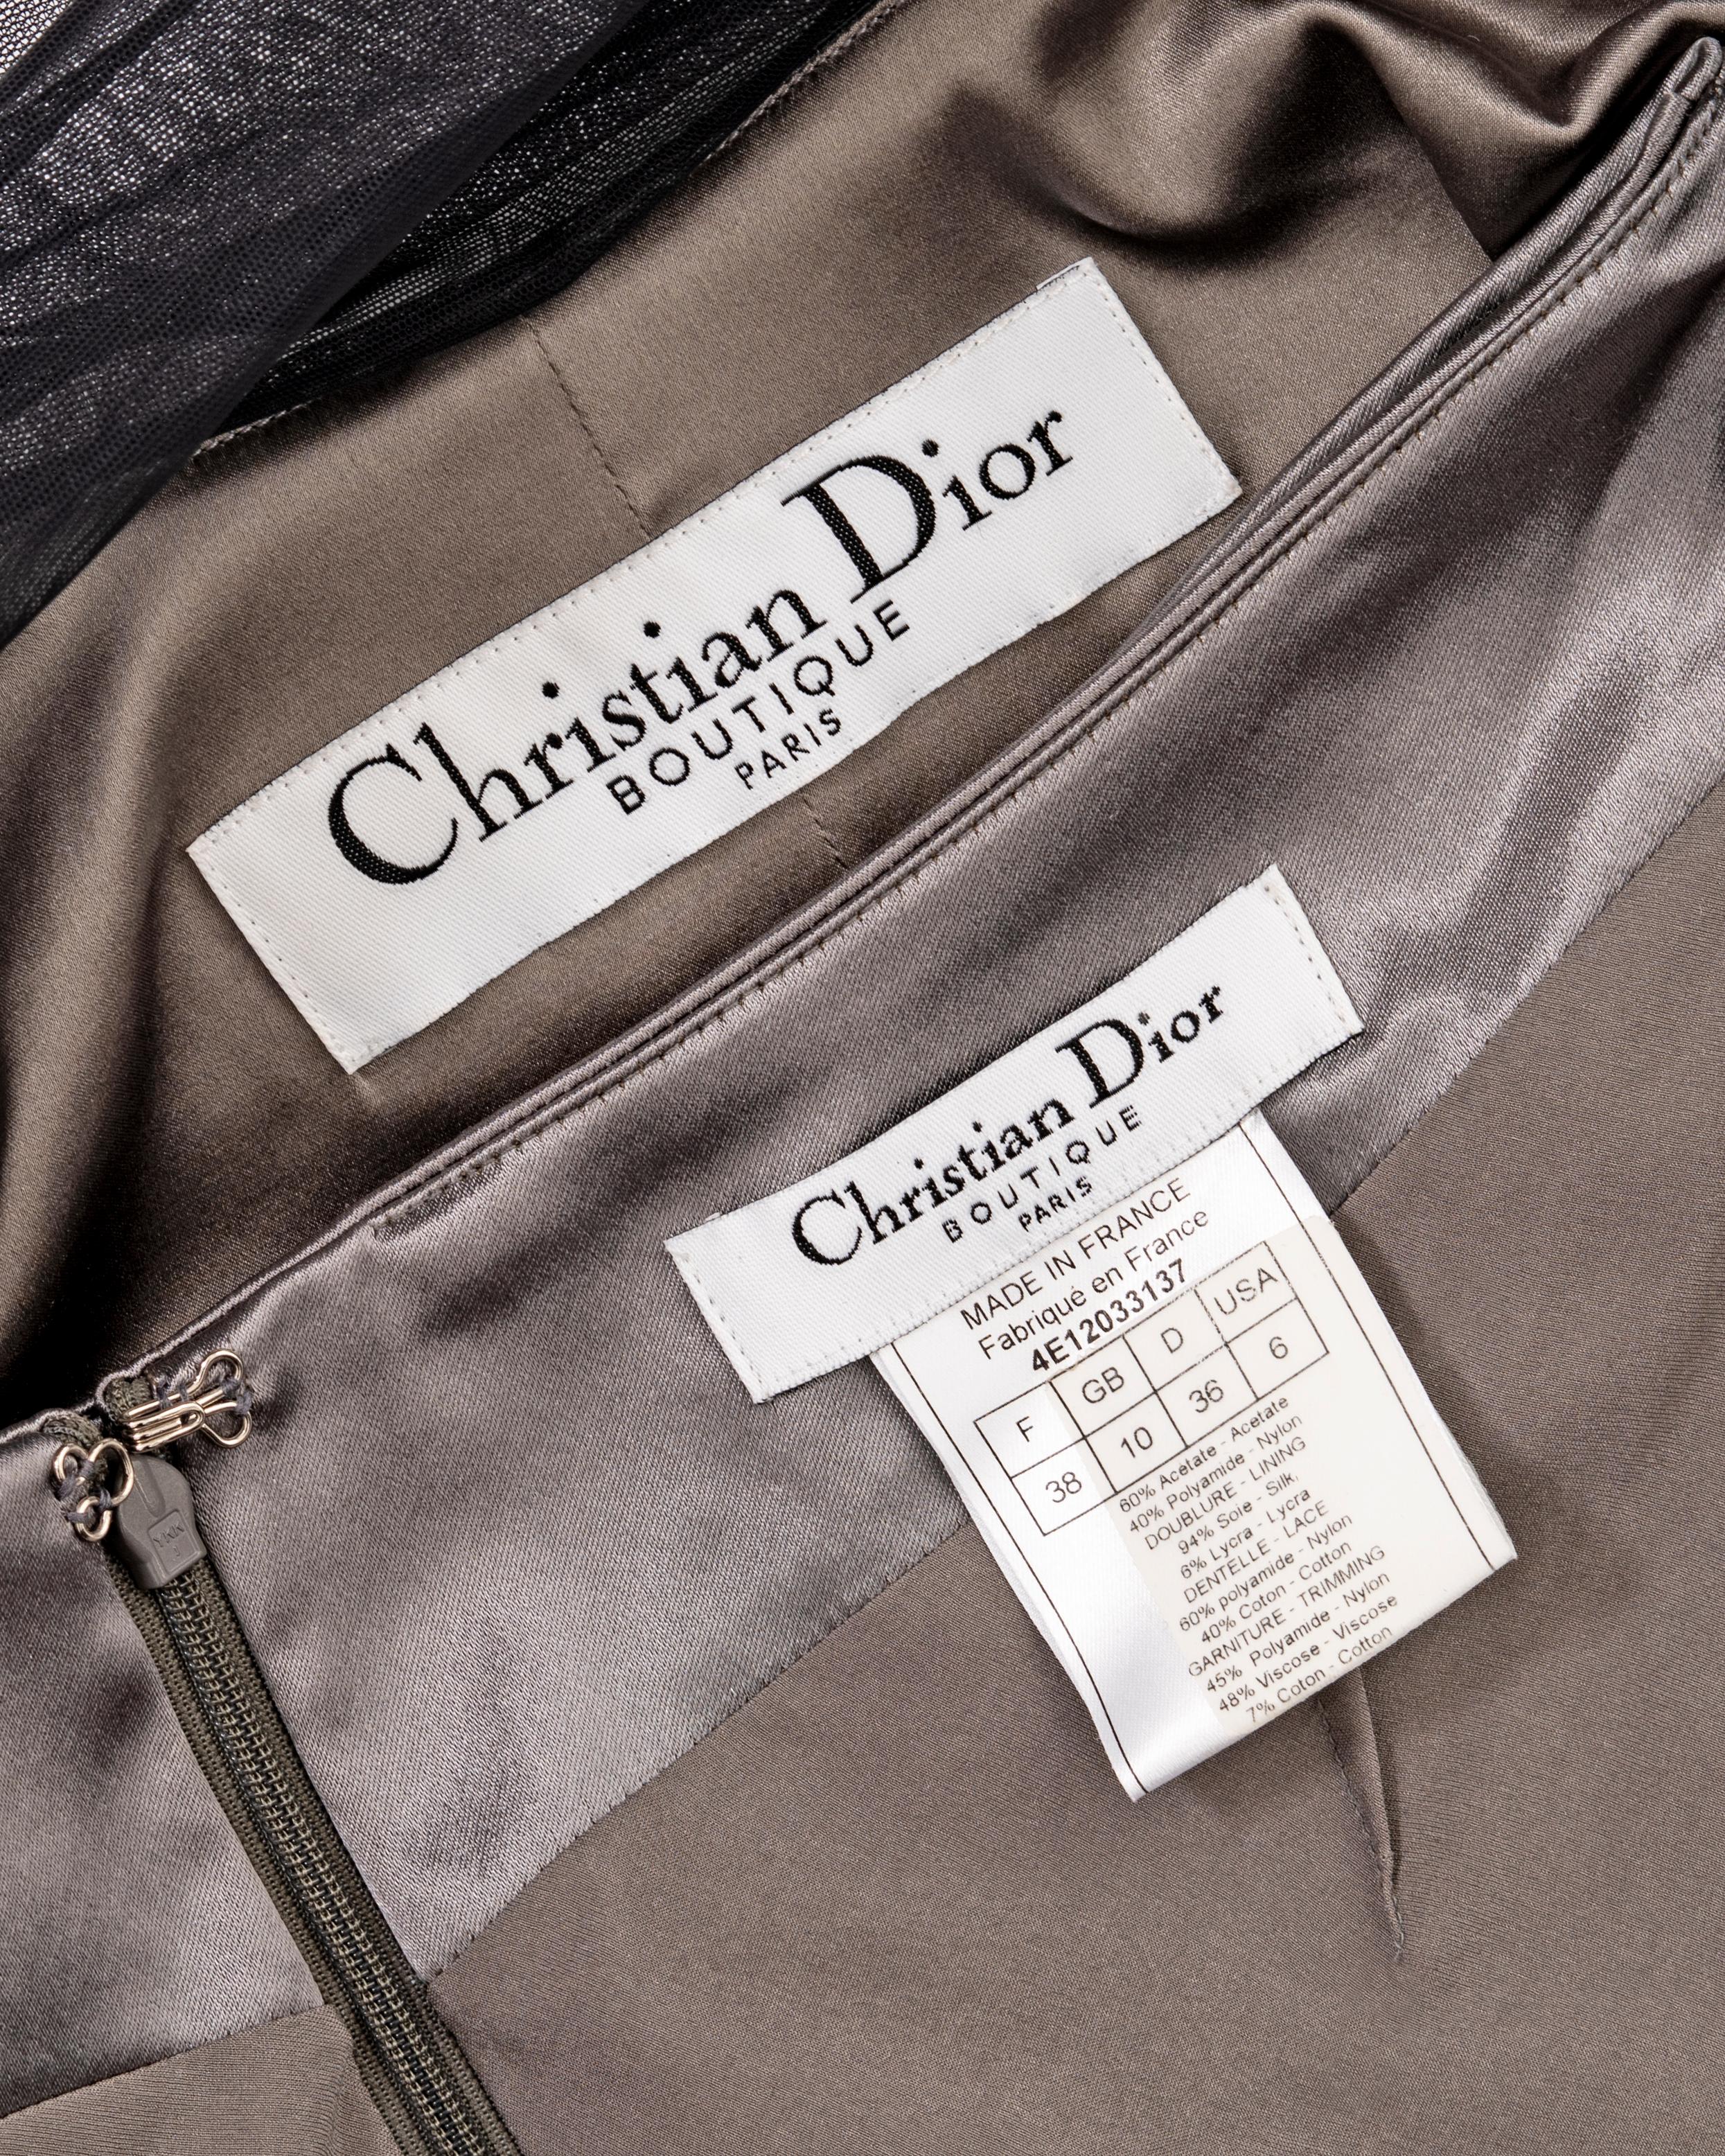 Christian Dior by John Galliano silver-grey stretch satin skirt suit, ss 2004 14